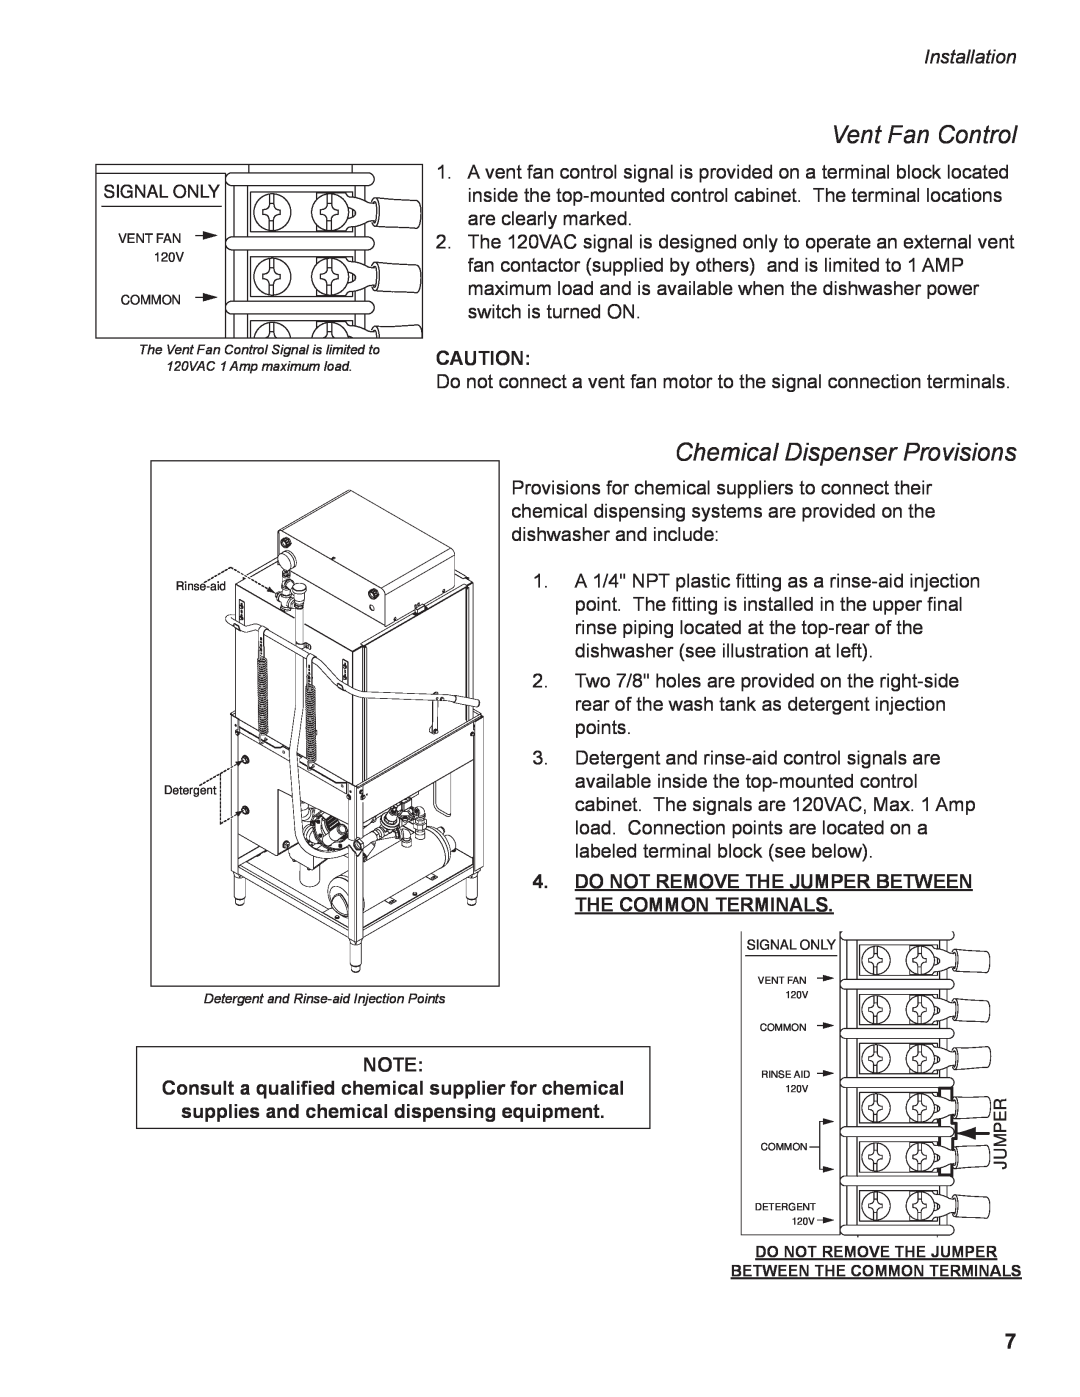 GE DH2000 Vent Fan Control, Chemical Dispenser Provisions, Do Not Remove The Jumper Between The Common Terminals 